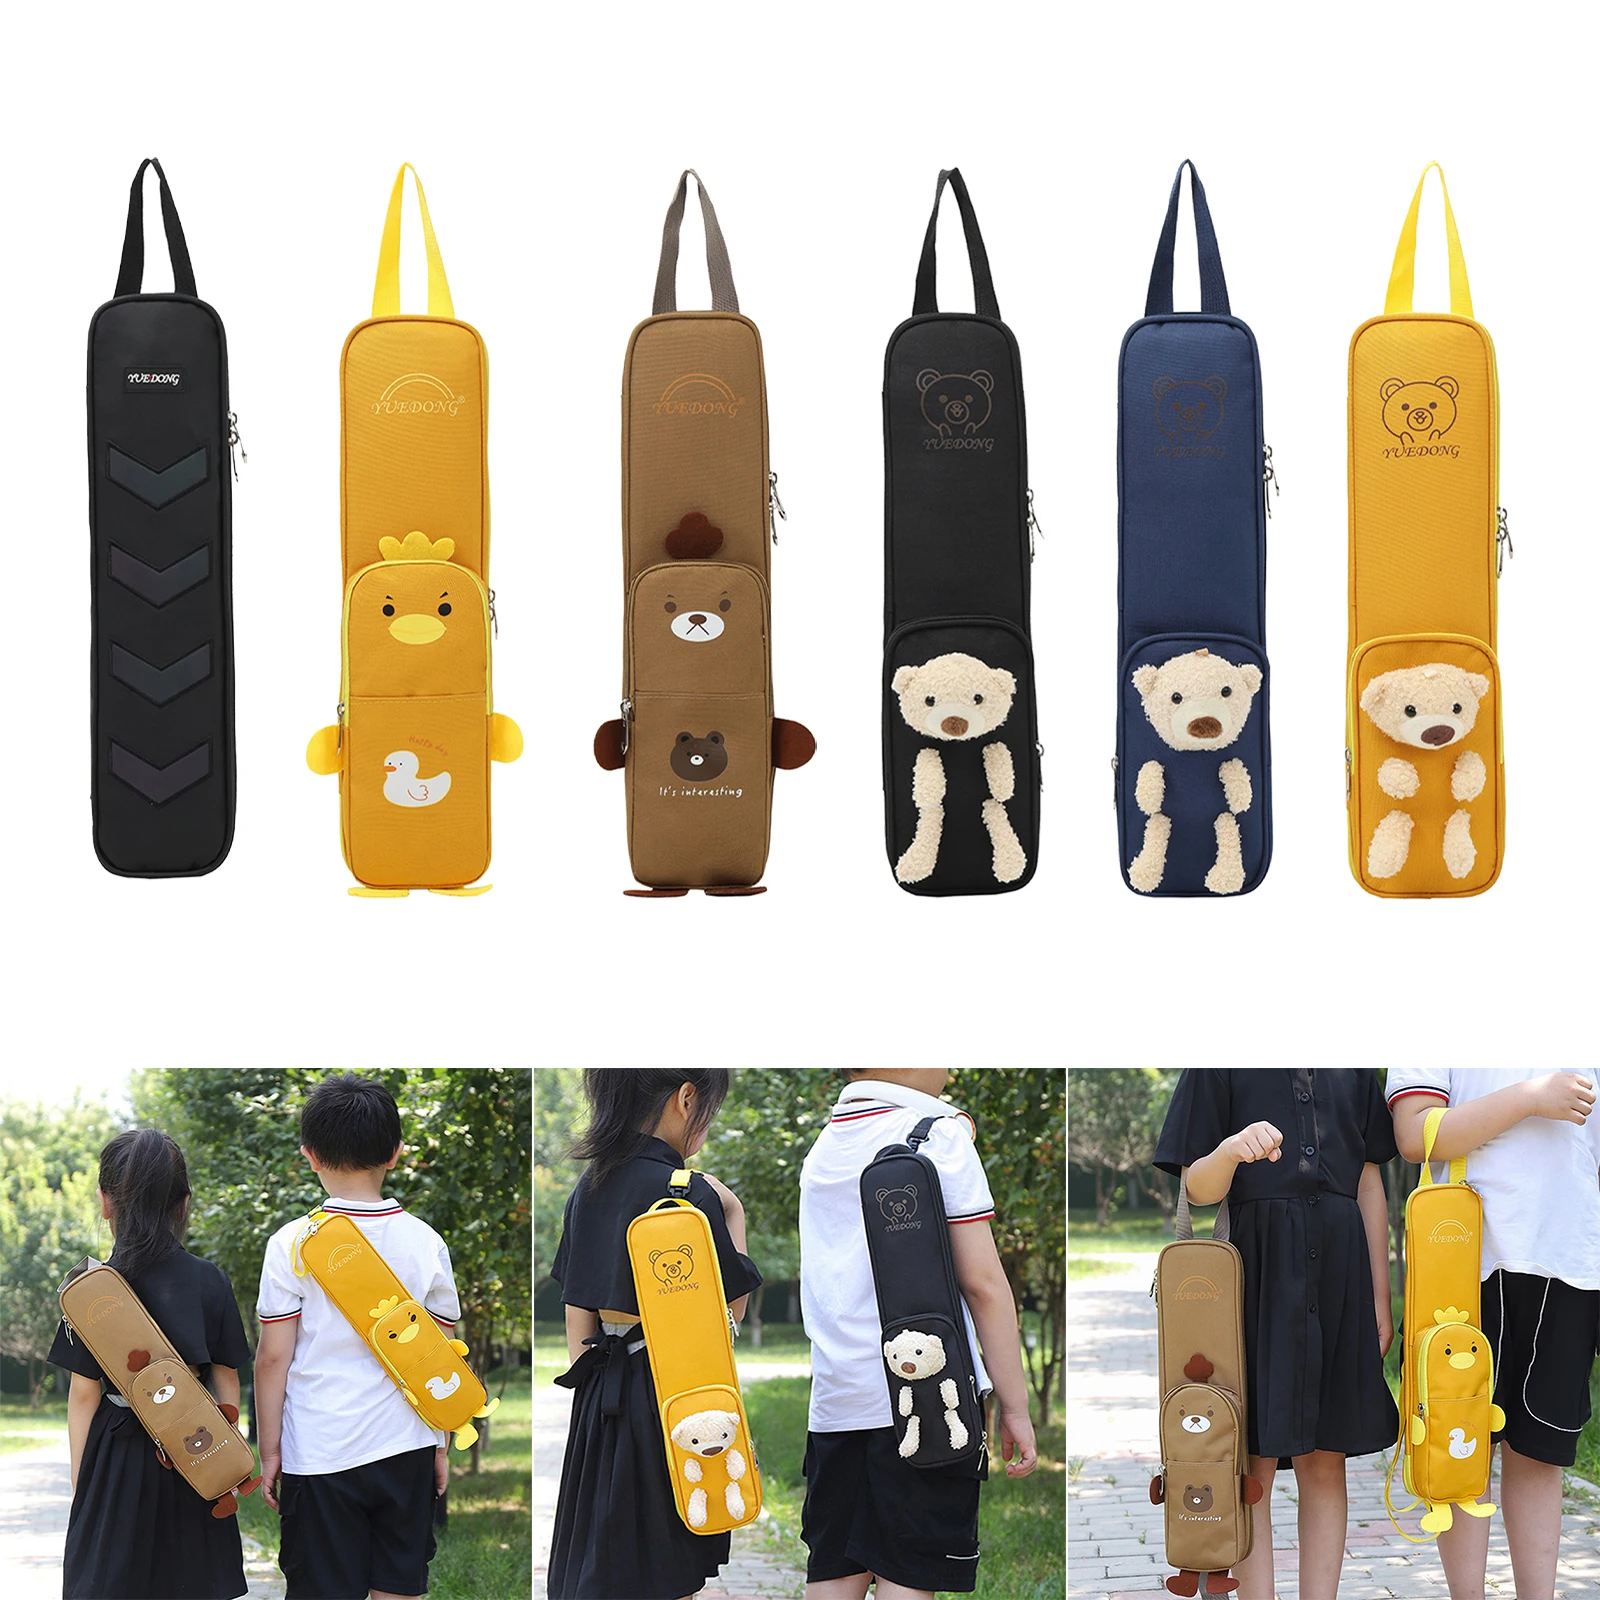 

Water Resistant Drum Stick Mallet Bag Drumstick Carry Case Accessories Weatherproof Adjustable Oxford Cloth for Percussion